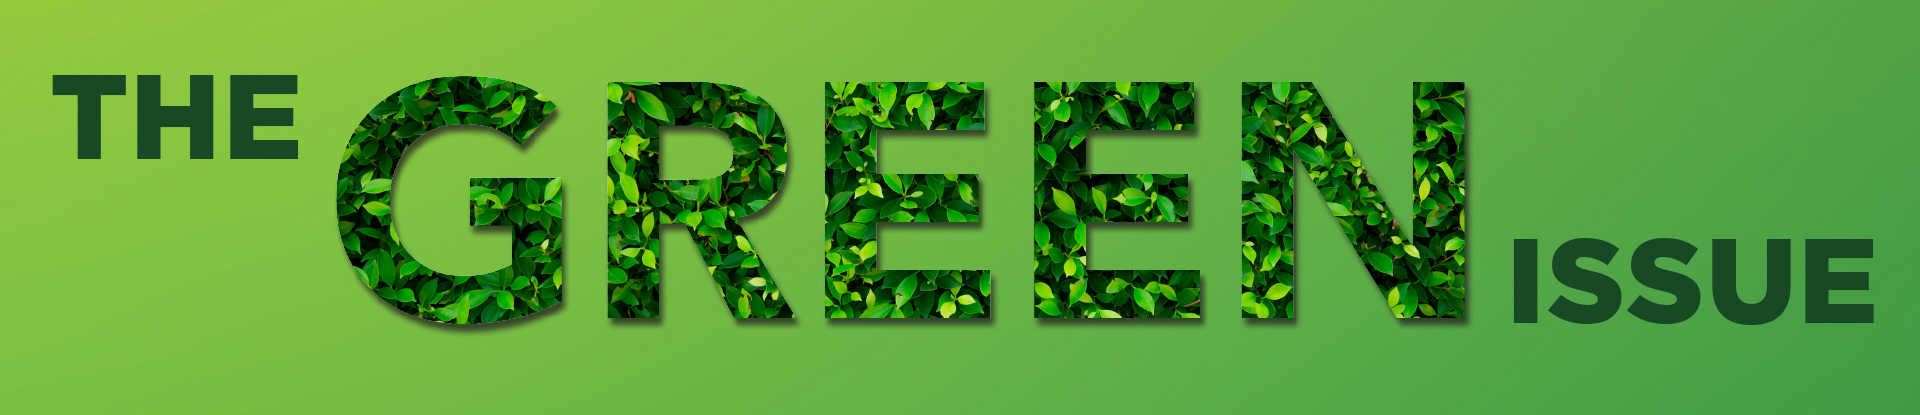 "The Green Issue" on a green gradient background